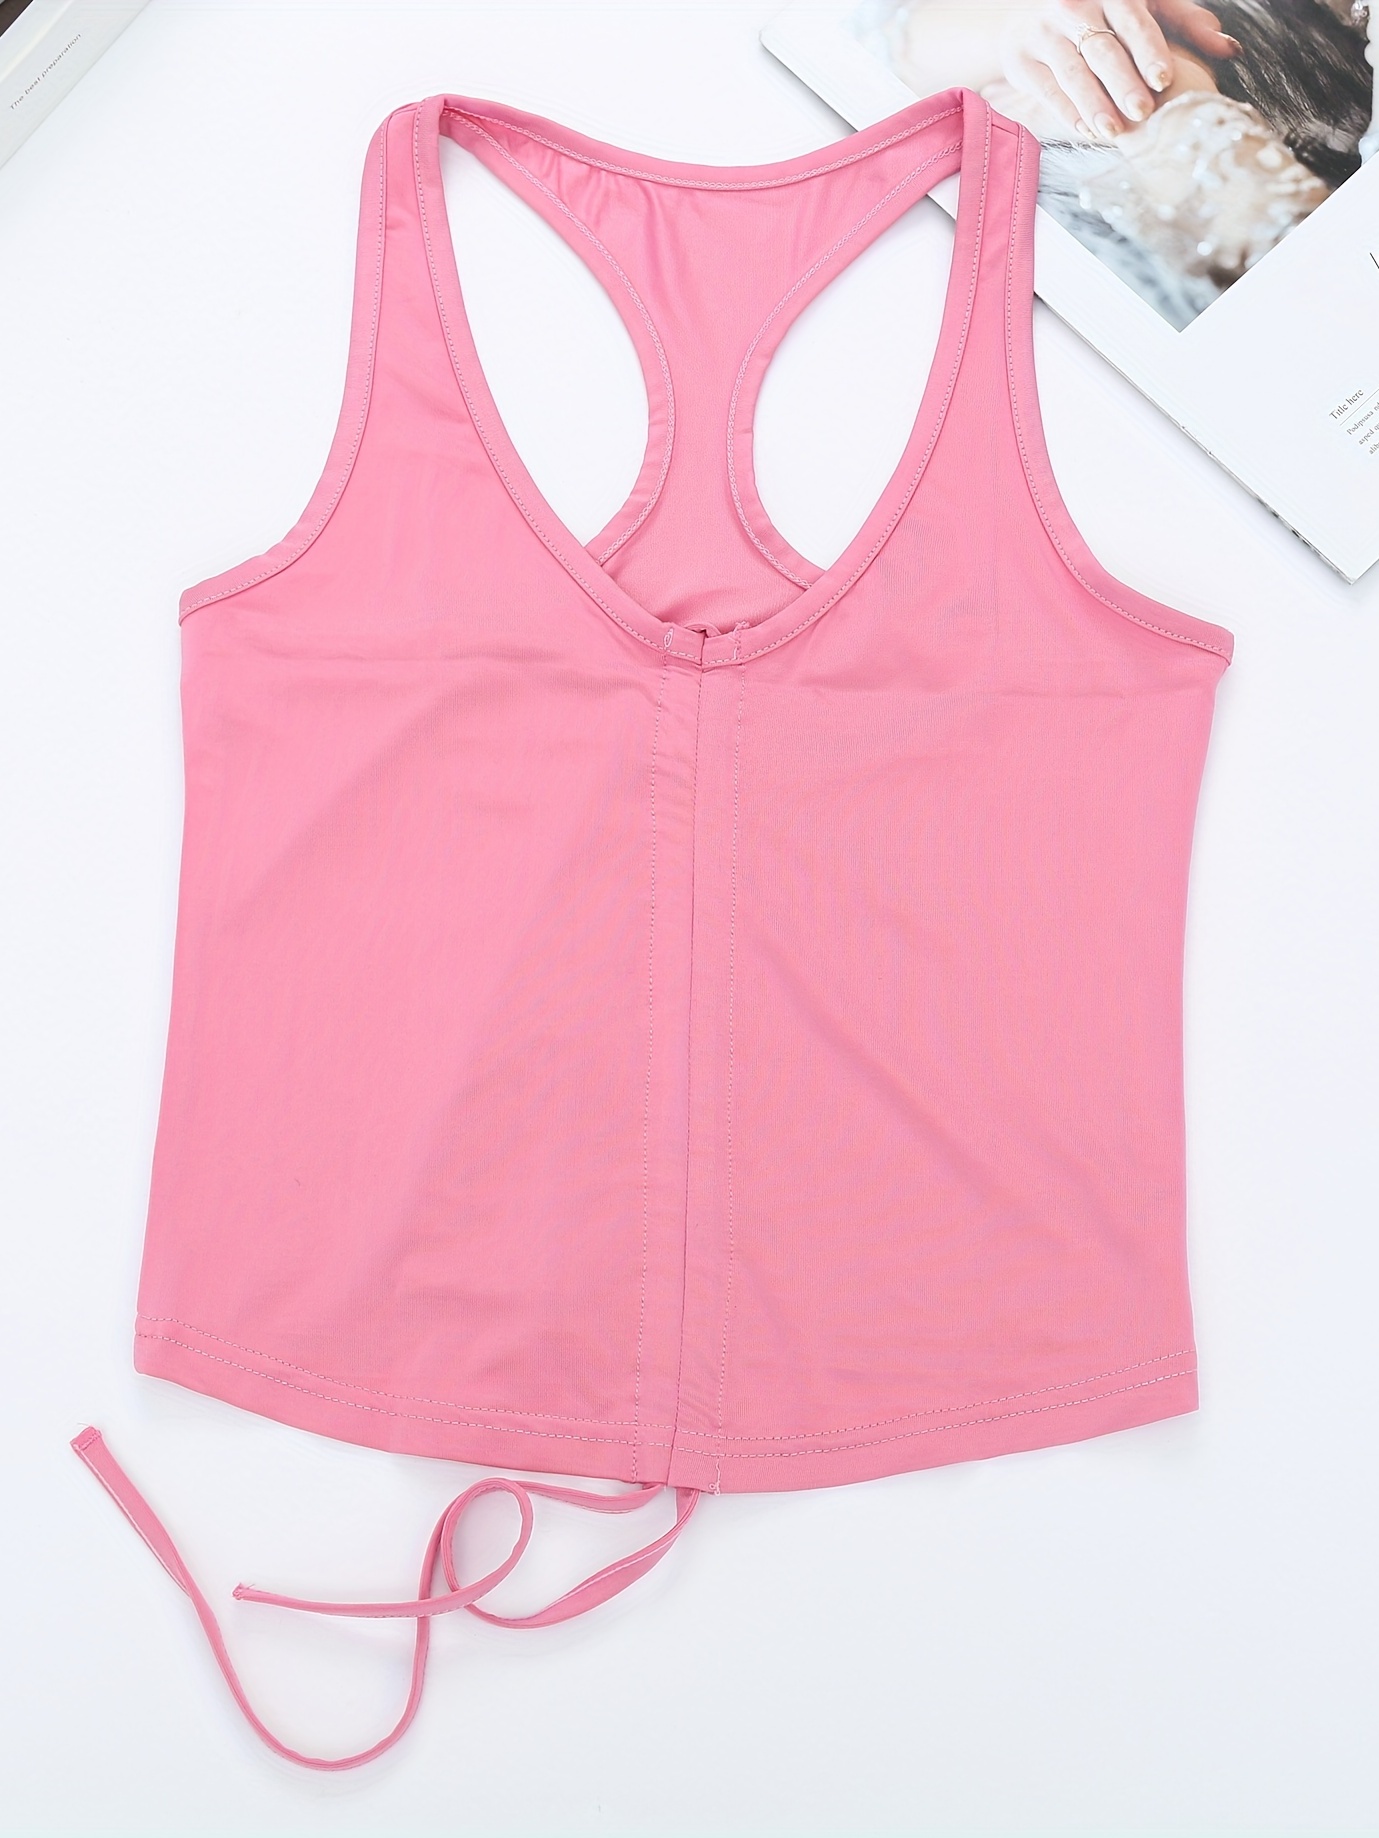 Women's Activewear: Look Stylish & Feel Comfortable With Solid